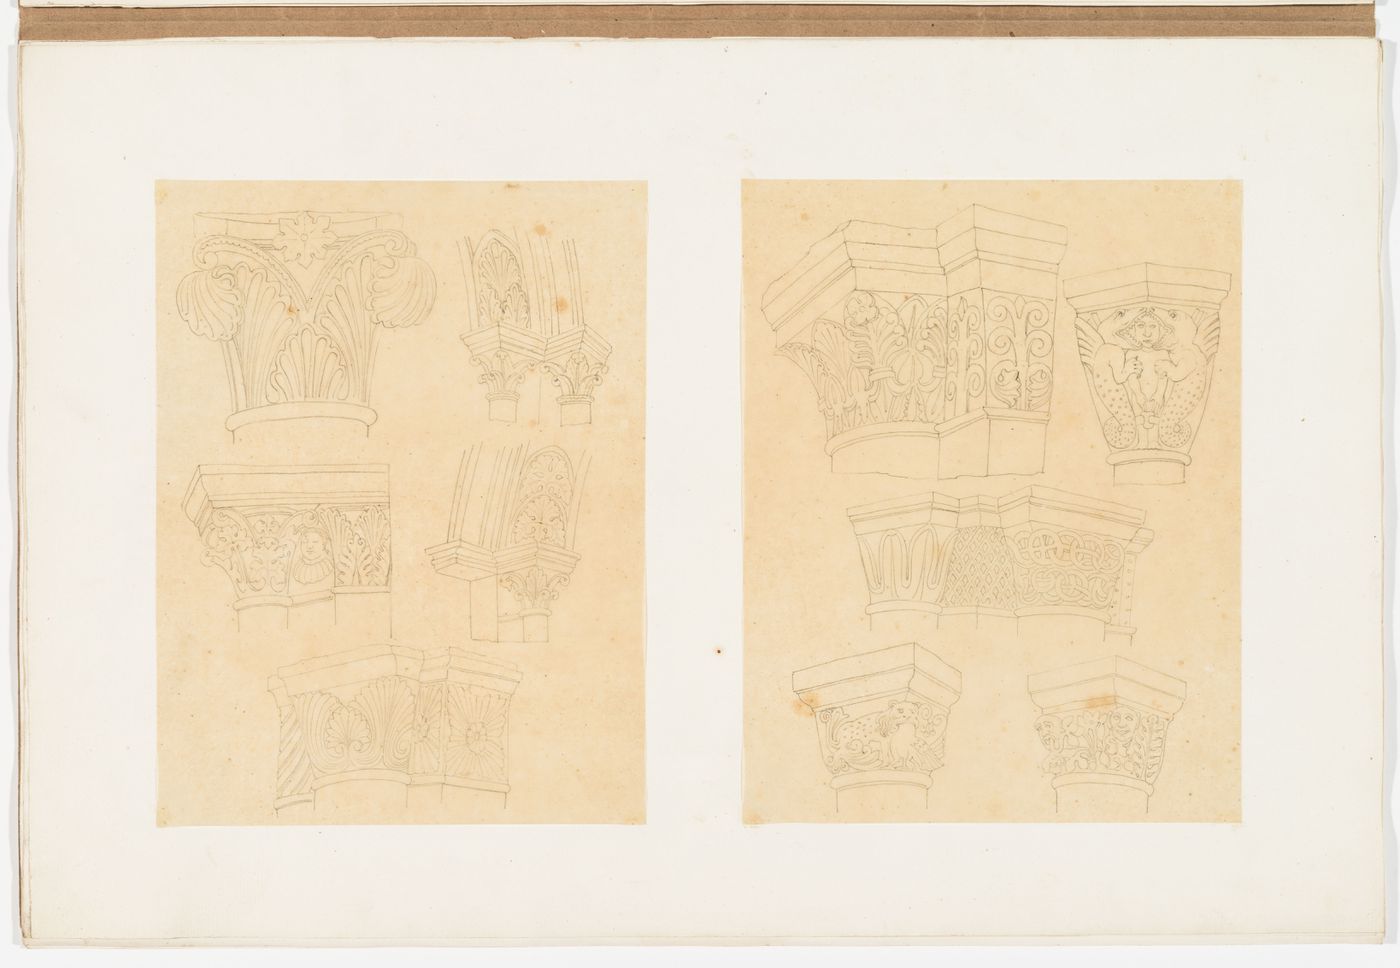 Two drawings of Gothic architectural elements: capitals, archways showing the springing point arrangements and ornamentation of the archivolts, and compound piers